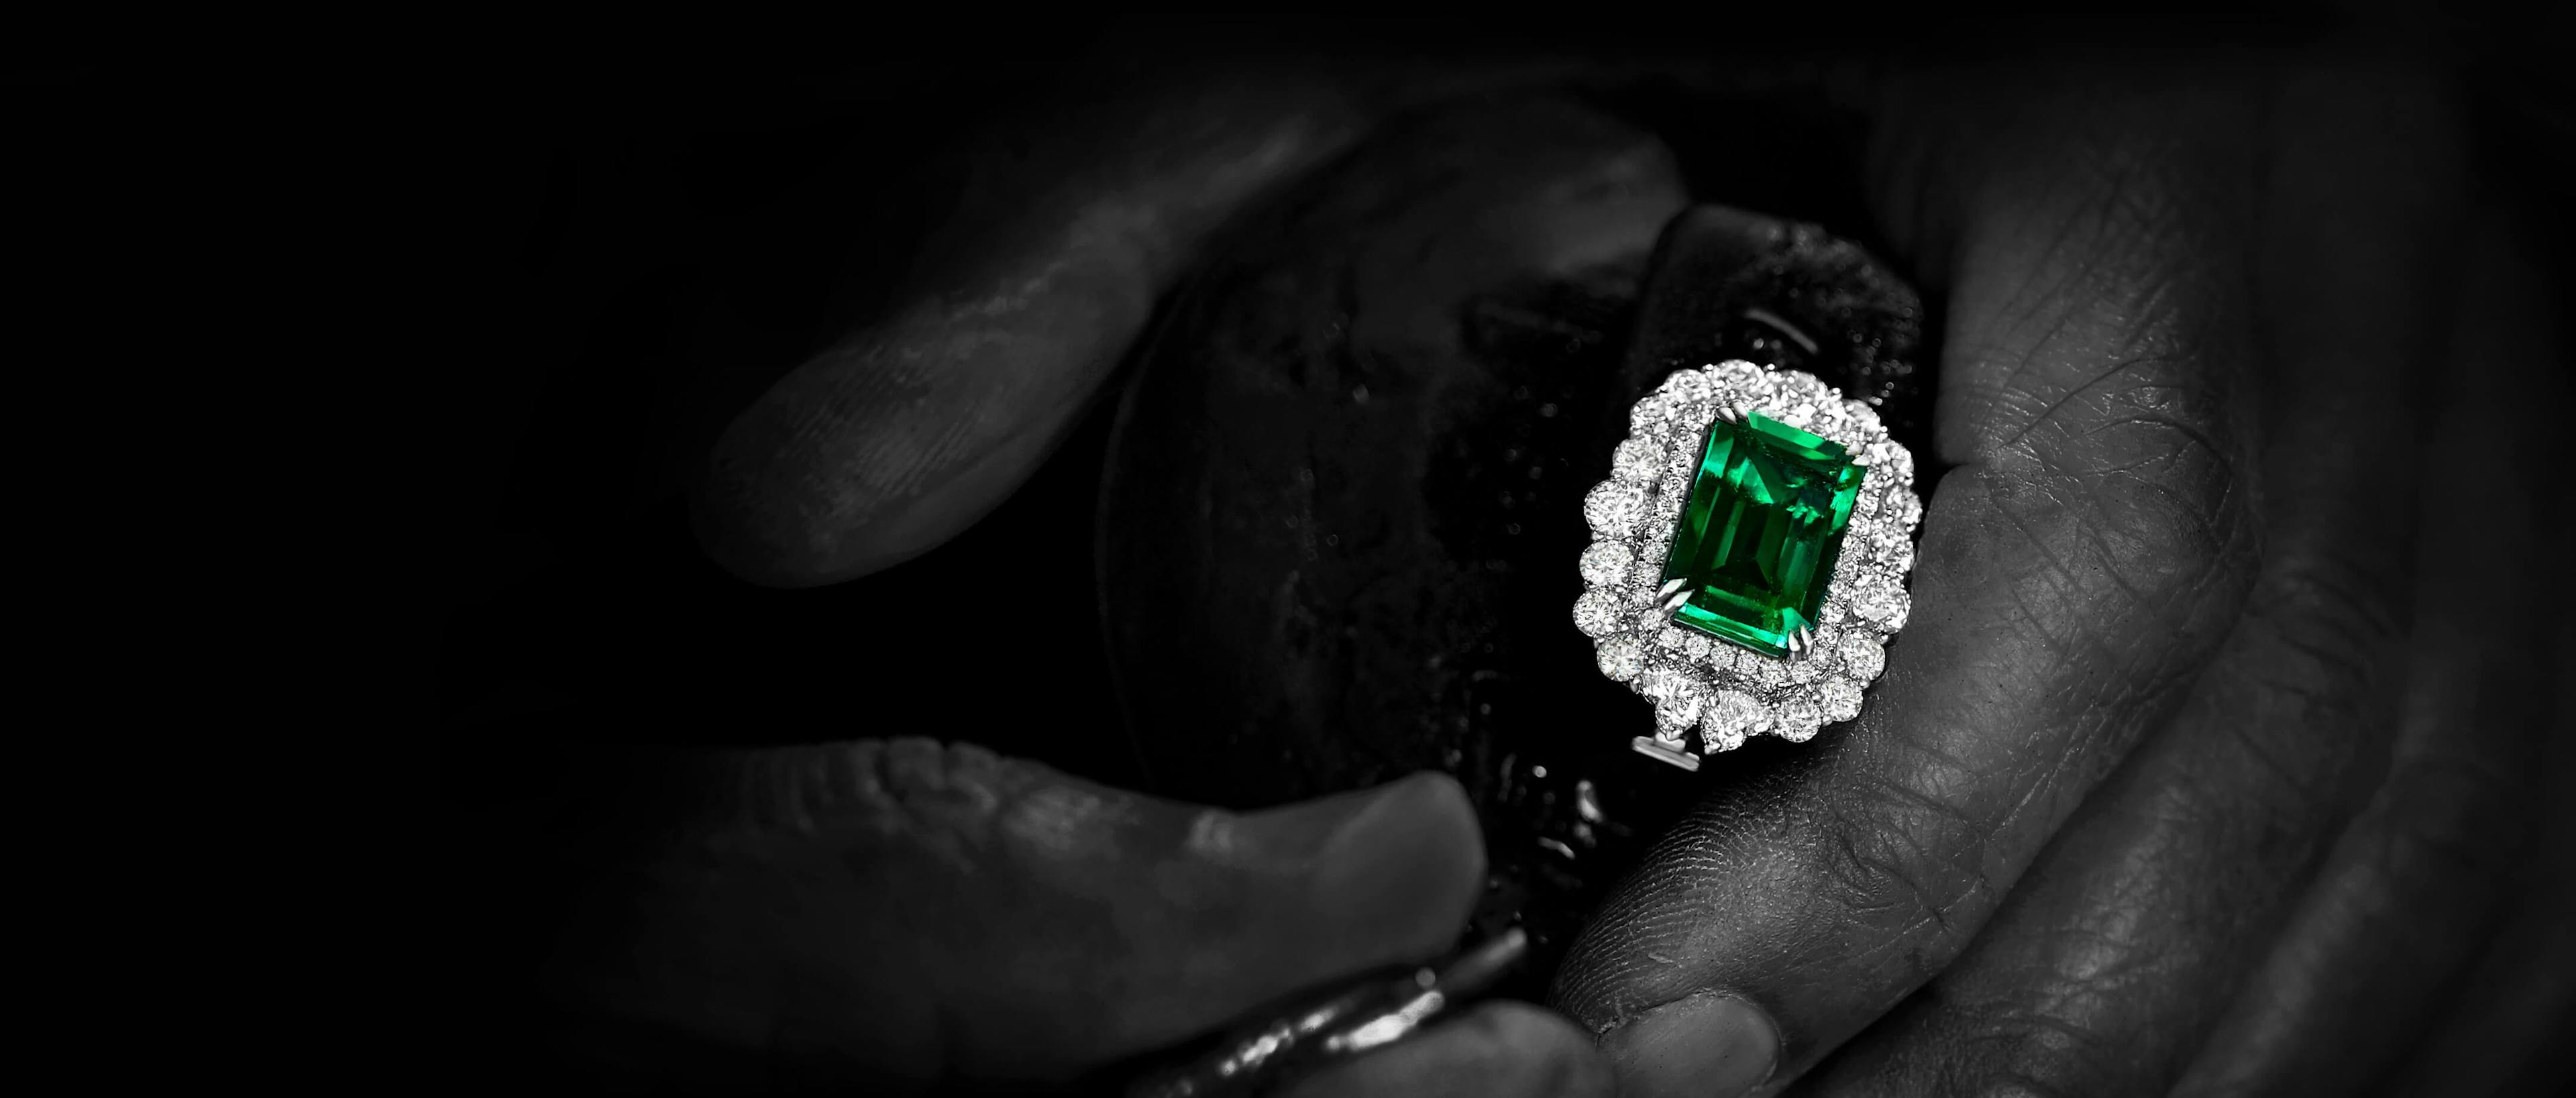 Columbian emerald engagement ring being crafted by craftsman